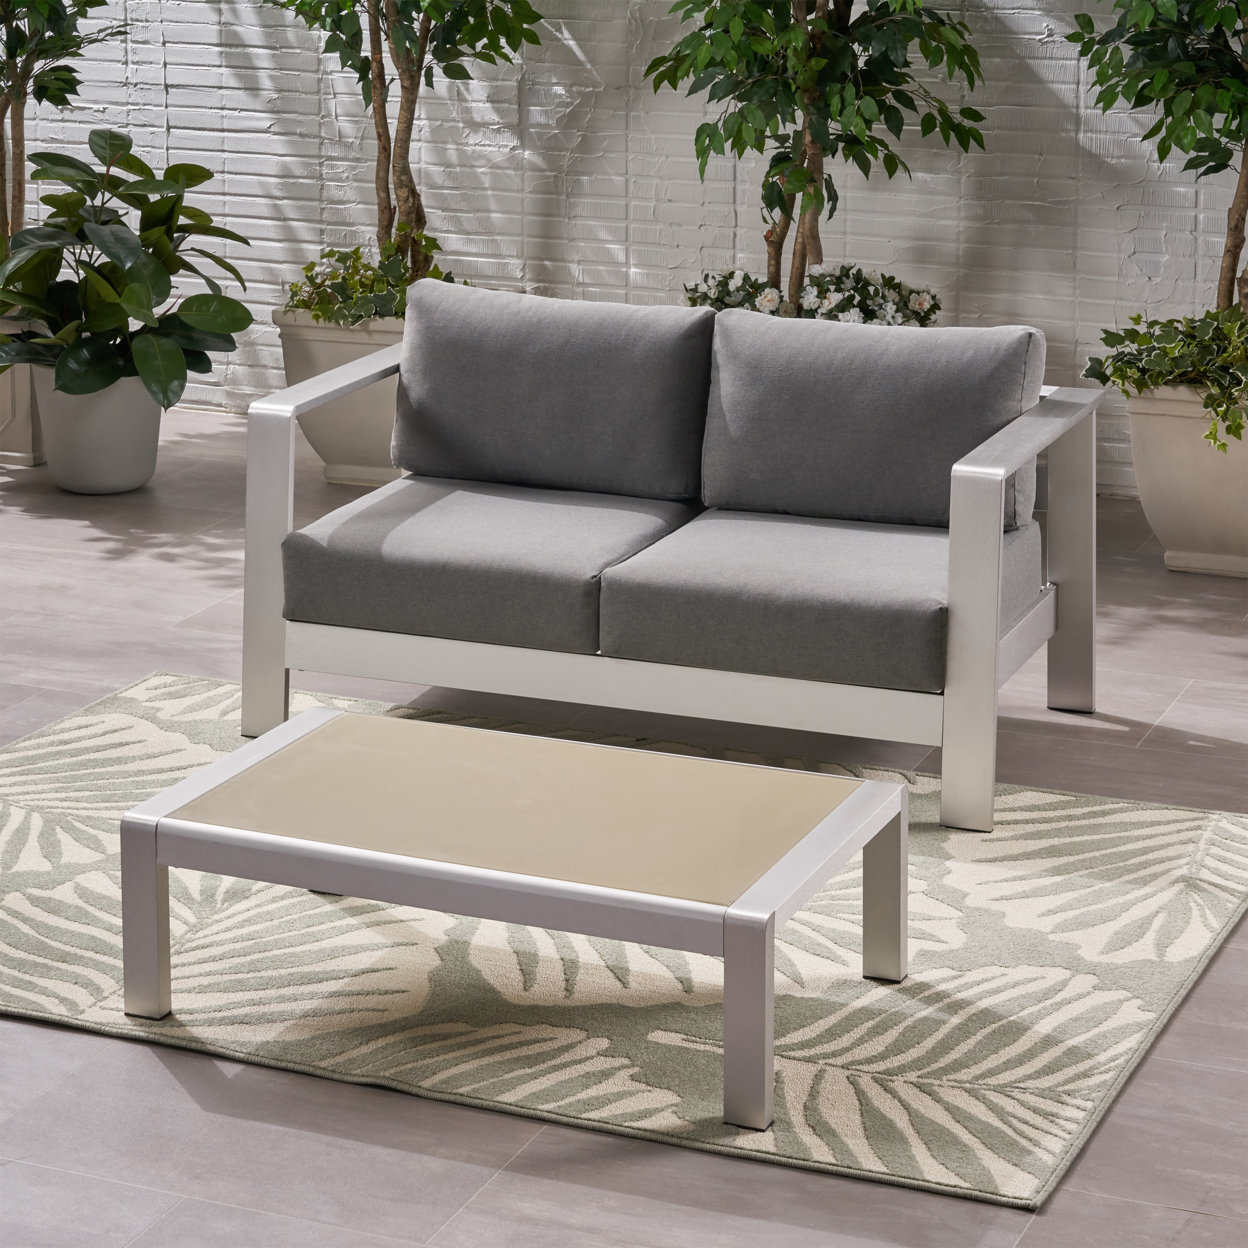 Sindy Outdoor Aluminum Club Chair And Coffee Table Set With Cushions - Silver + Gray